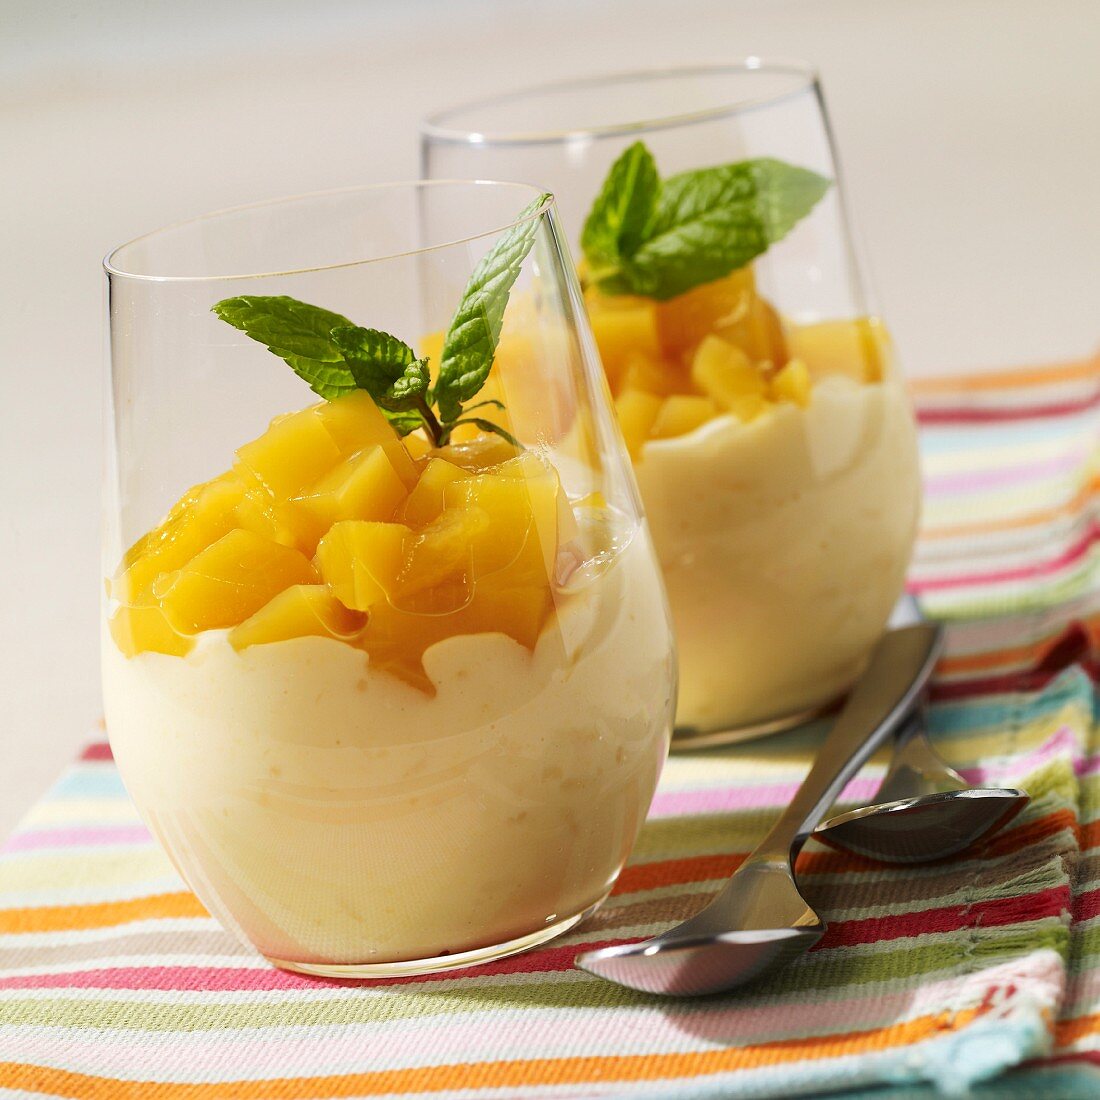 Rice pudding with mangoes